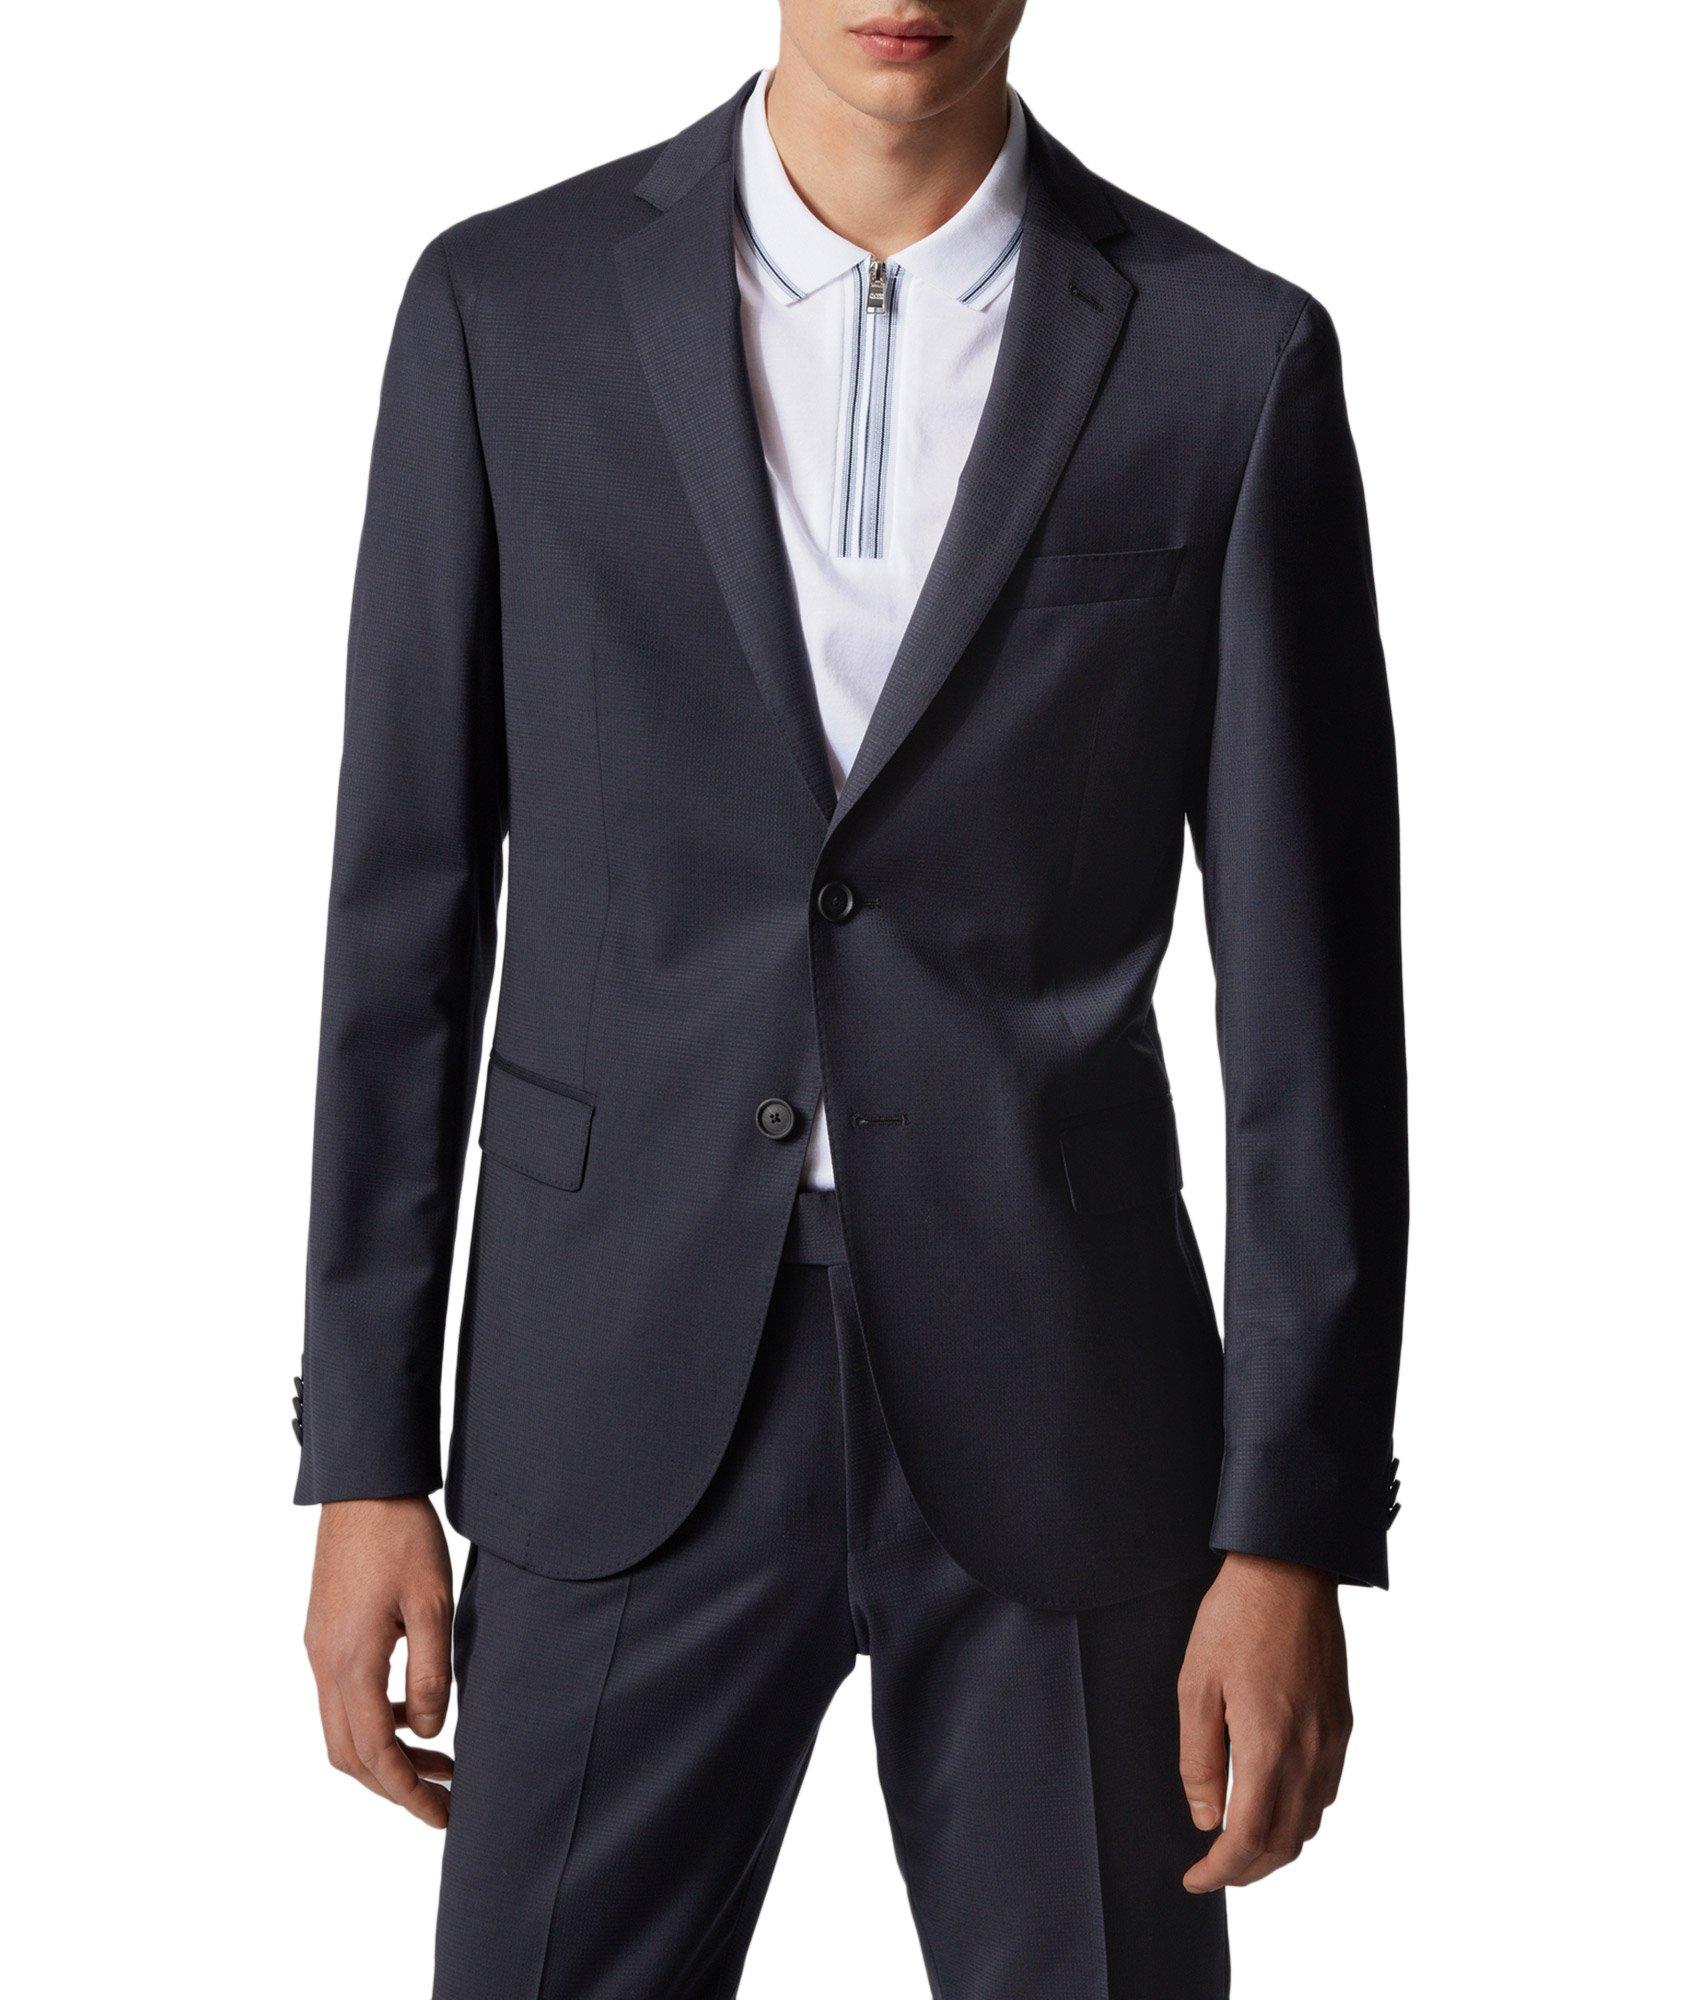 Neight2/Byte2 Textured Stretch-Wool Suit image 0